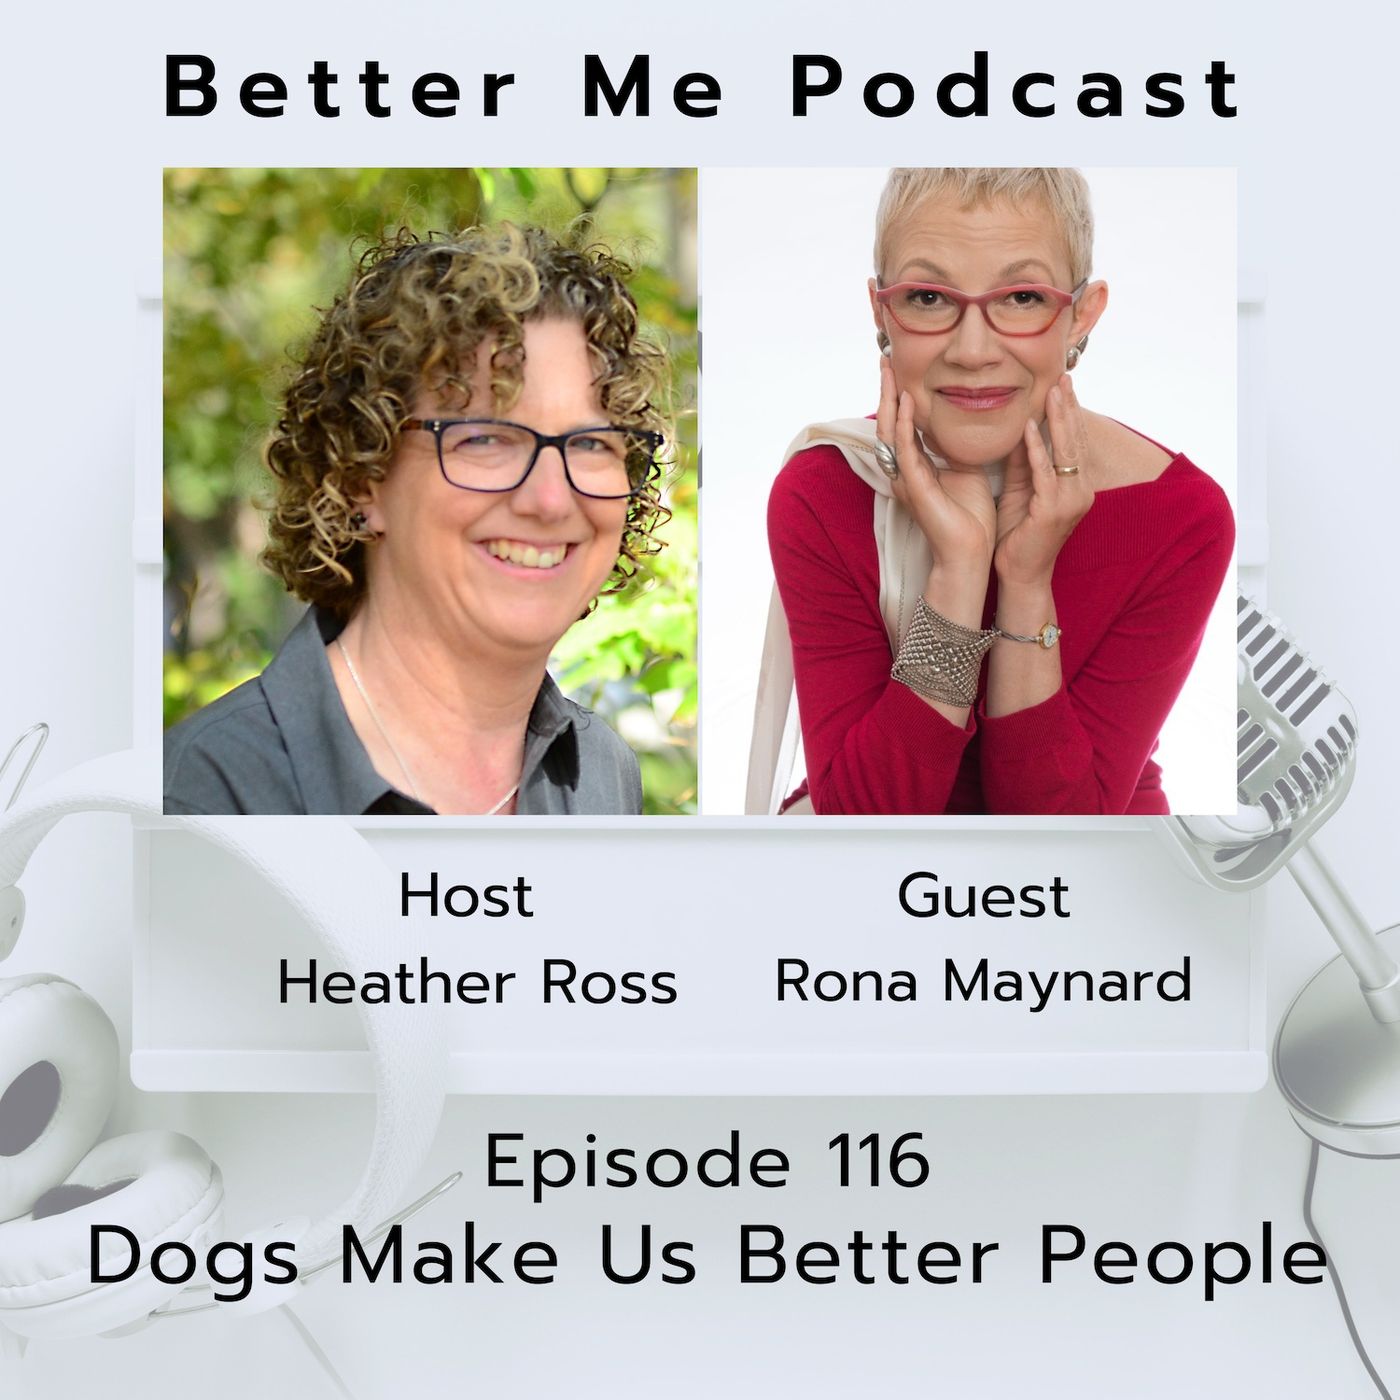 EP 116 Dogs Make Us Better People (with guest Rona Maynard)